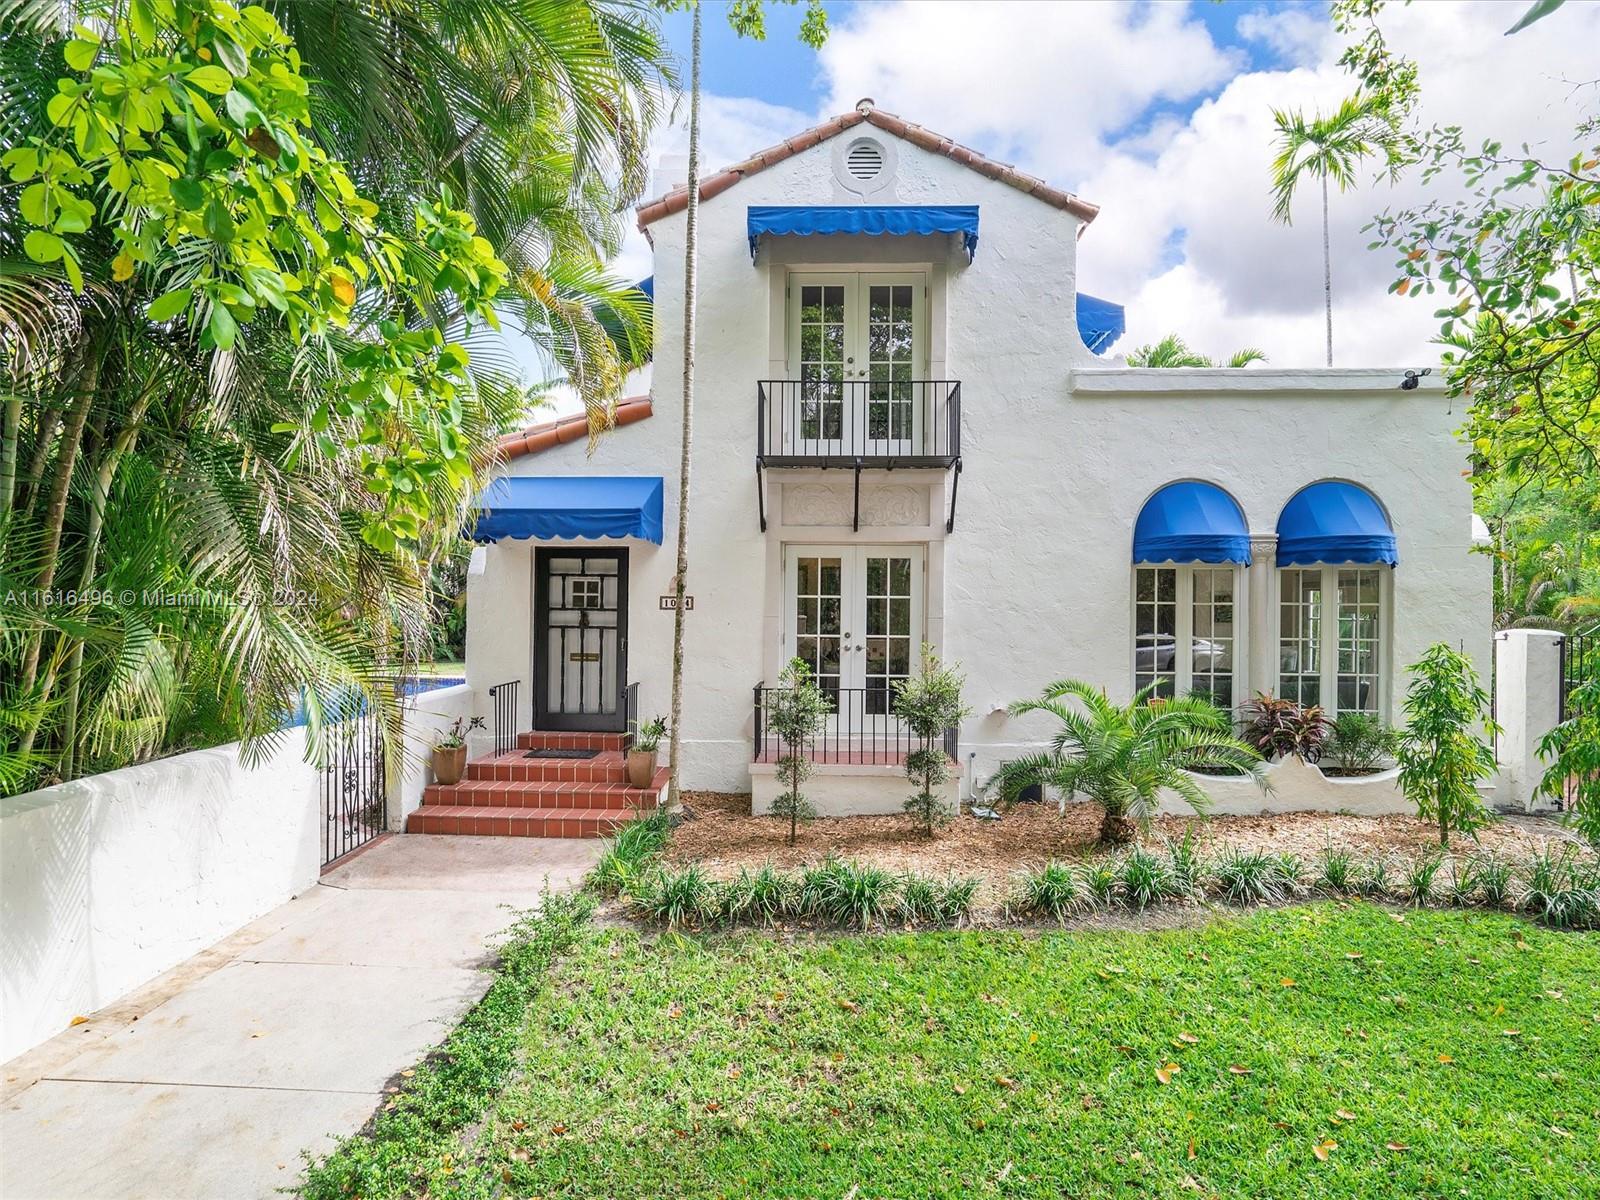 Visit this early Coral Gables gem along a beautiful tree-lined street and a highly sought after location. Enjoy a spectacular resort-size pool, clad in mosaic tiles, on a large double lot. Designed by prominent architect Walter De Garmo, the two-story main house and large Casita offer an enviable South Florida lifestyle.
Easy access to MIA Airport, U of Miami, and downtown Coral Gables. Short walk to The Biltmore, Miracle Mile, and recreational facilities.
Ideal for indoor and outdoor entertainment while lush landscaping affords privacy. Opportunities abound! Schedule a visit through Showing Time.